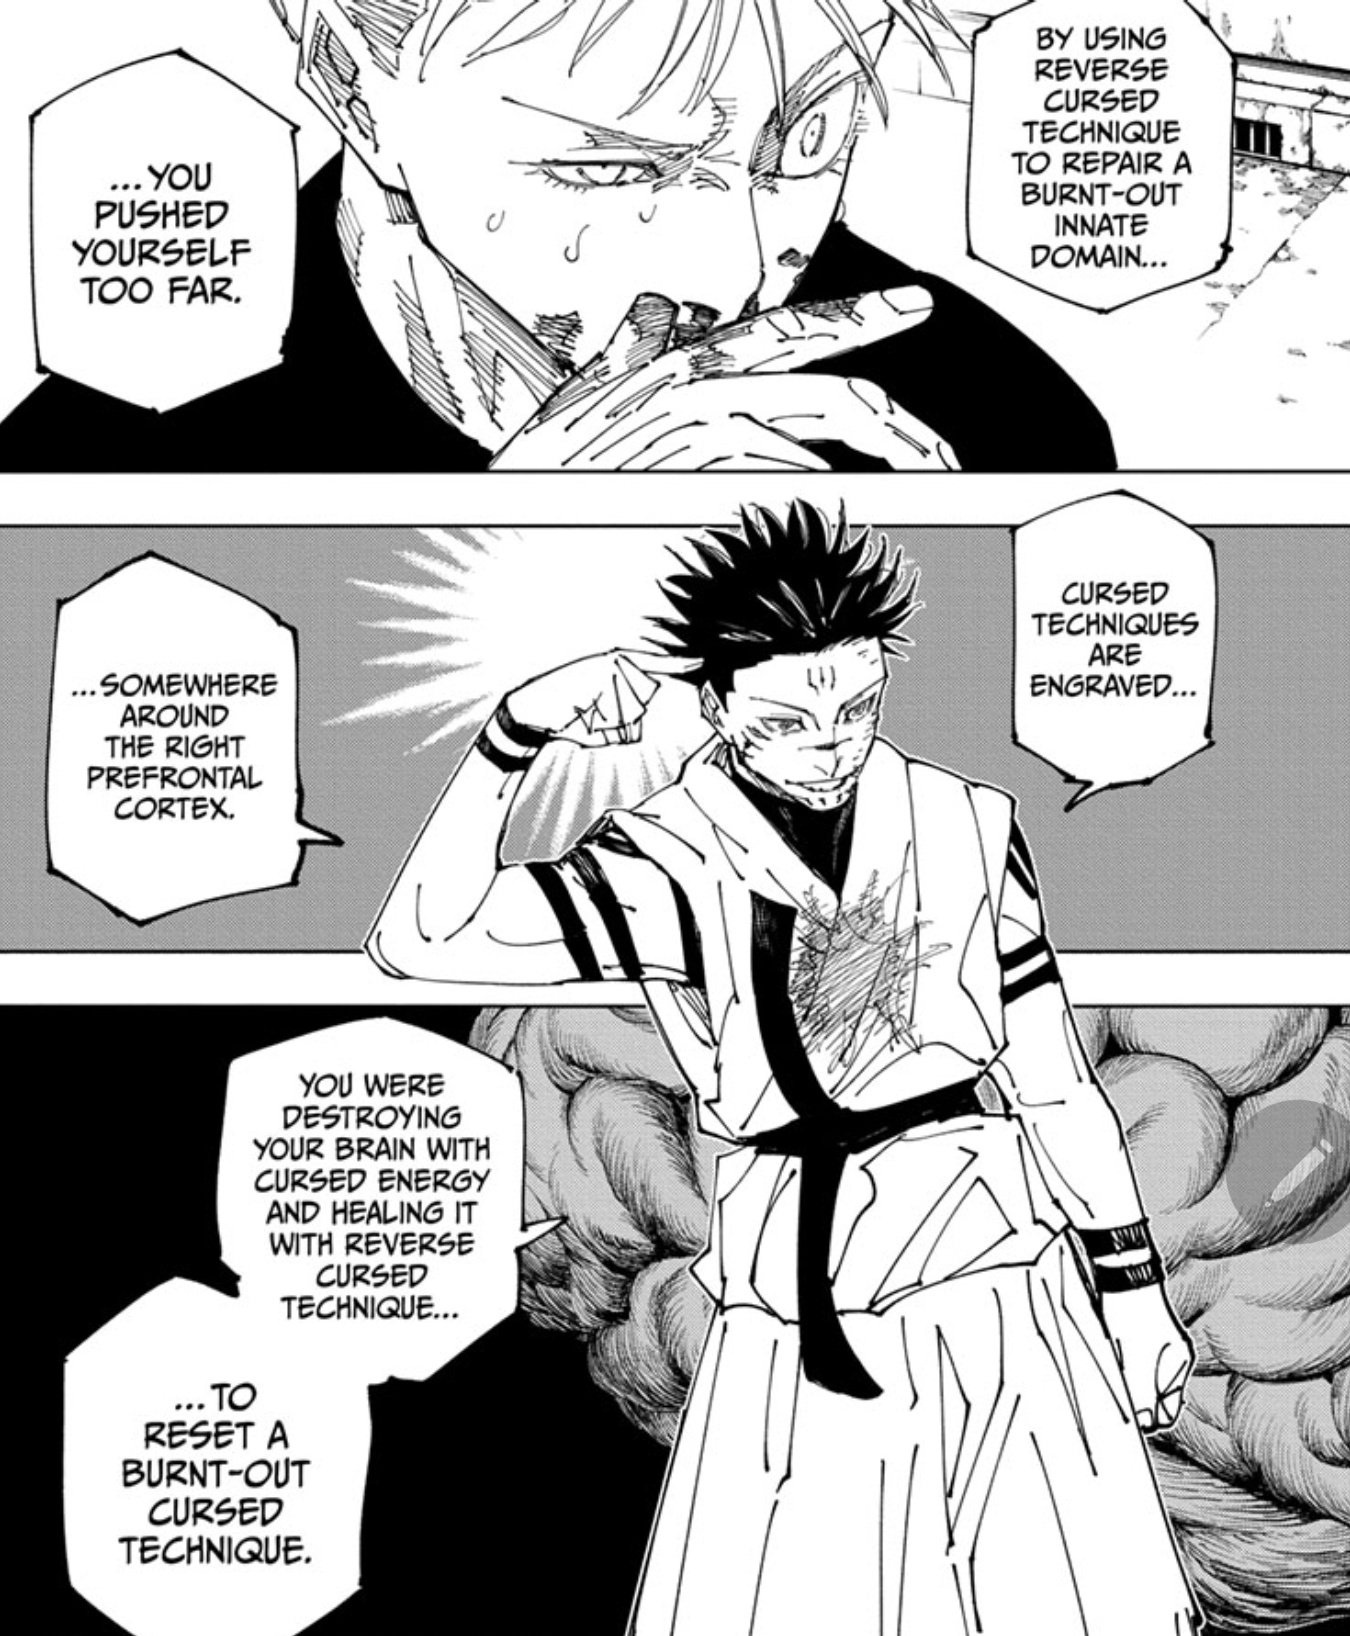 Get lost. You're useless Kyaa! Ginji must be really shock for the words  Ban told him